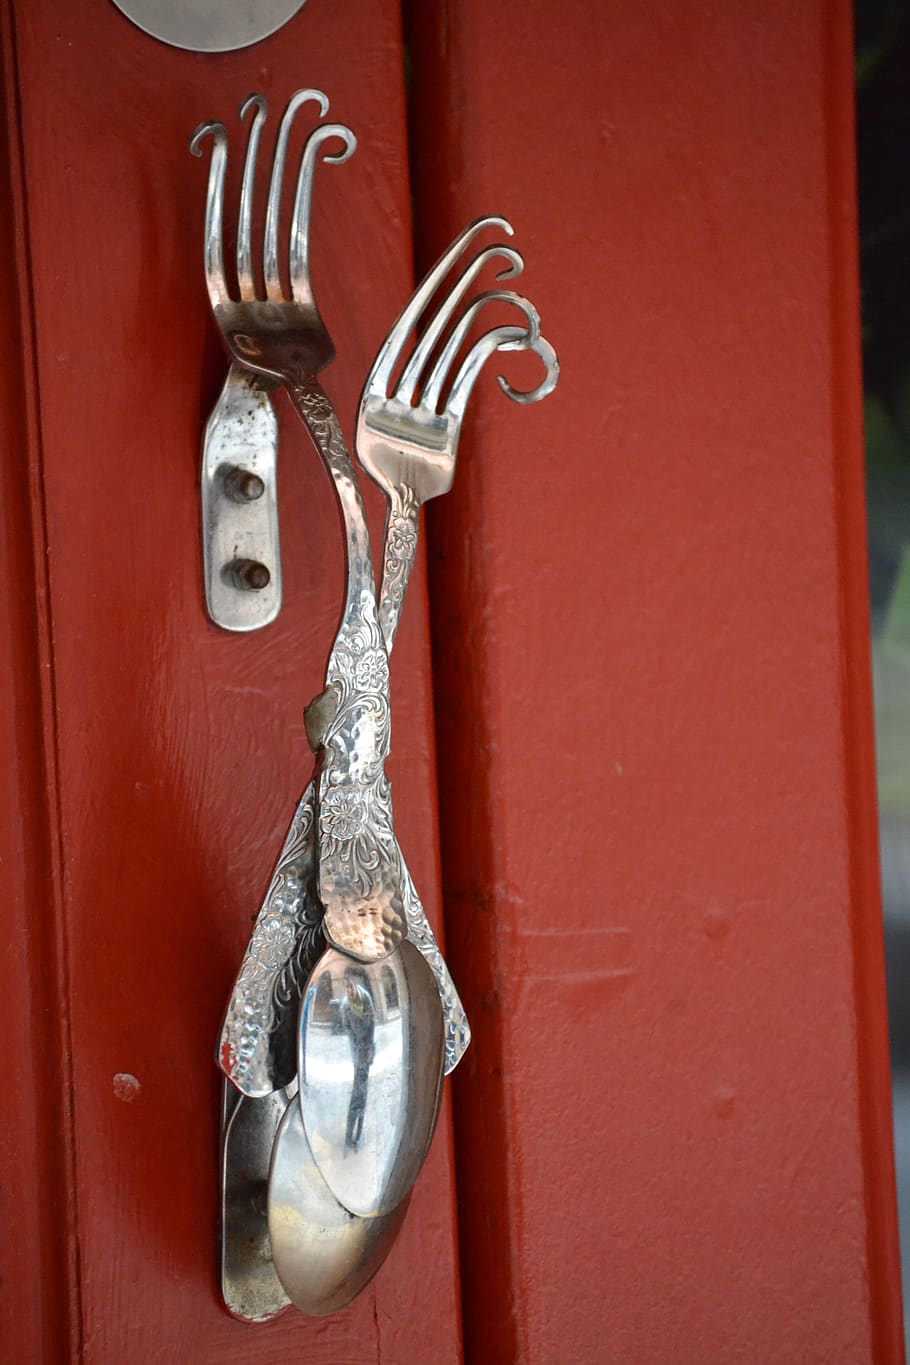 decoration, forks, unusual, metal, close-up, entrance, door, wood - material, red, silver colored